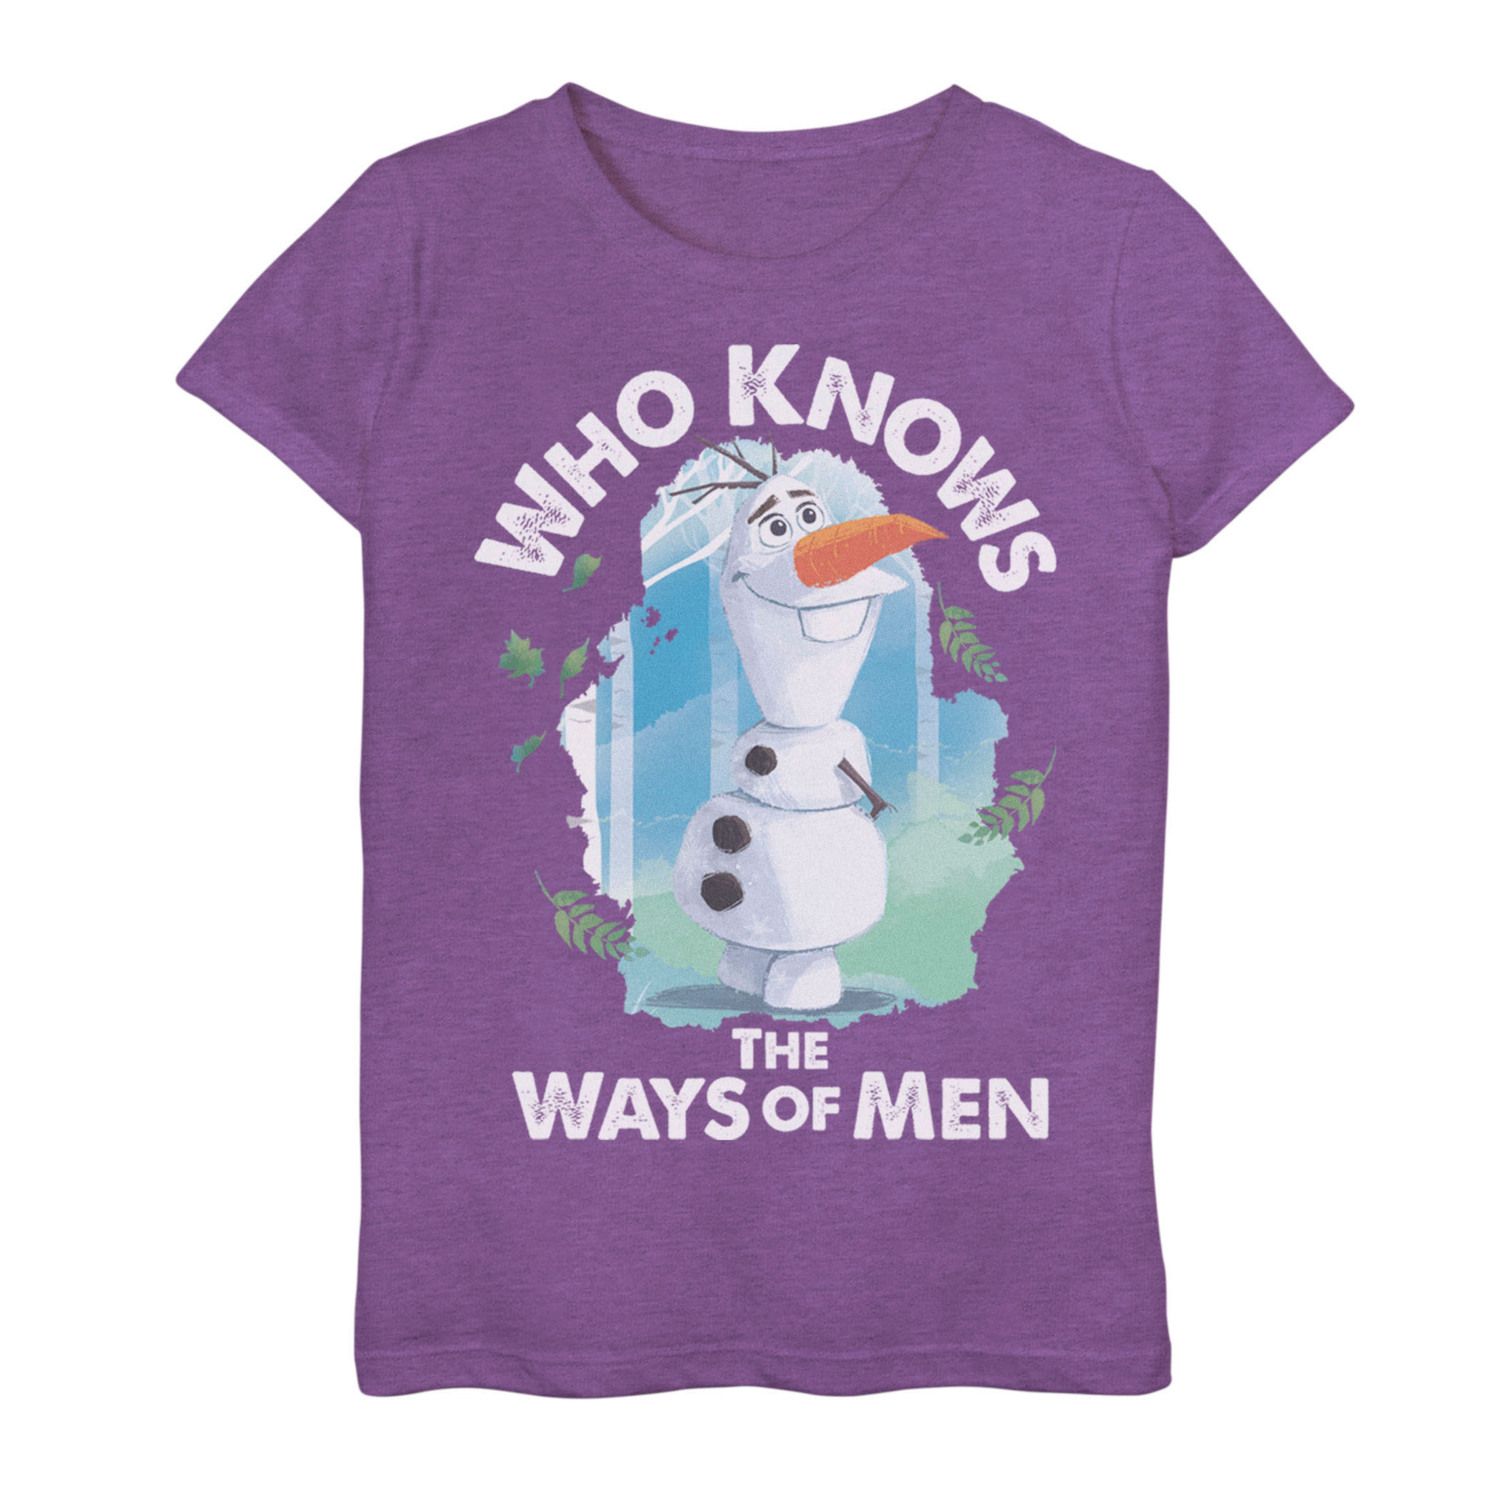 Image for Disney 's Frozen 2 Girls 7-16 Olaf Who Knows The Ways Of Men Graphic Tee at Kohl's.